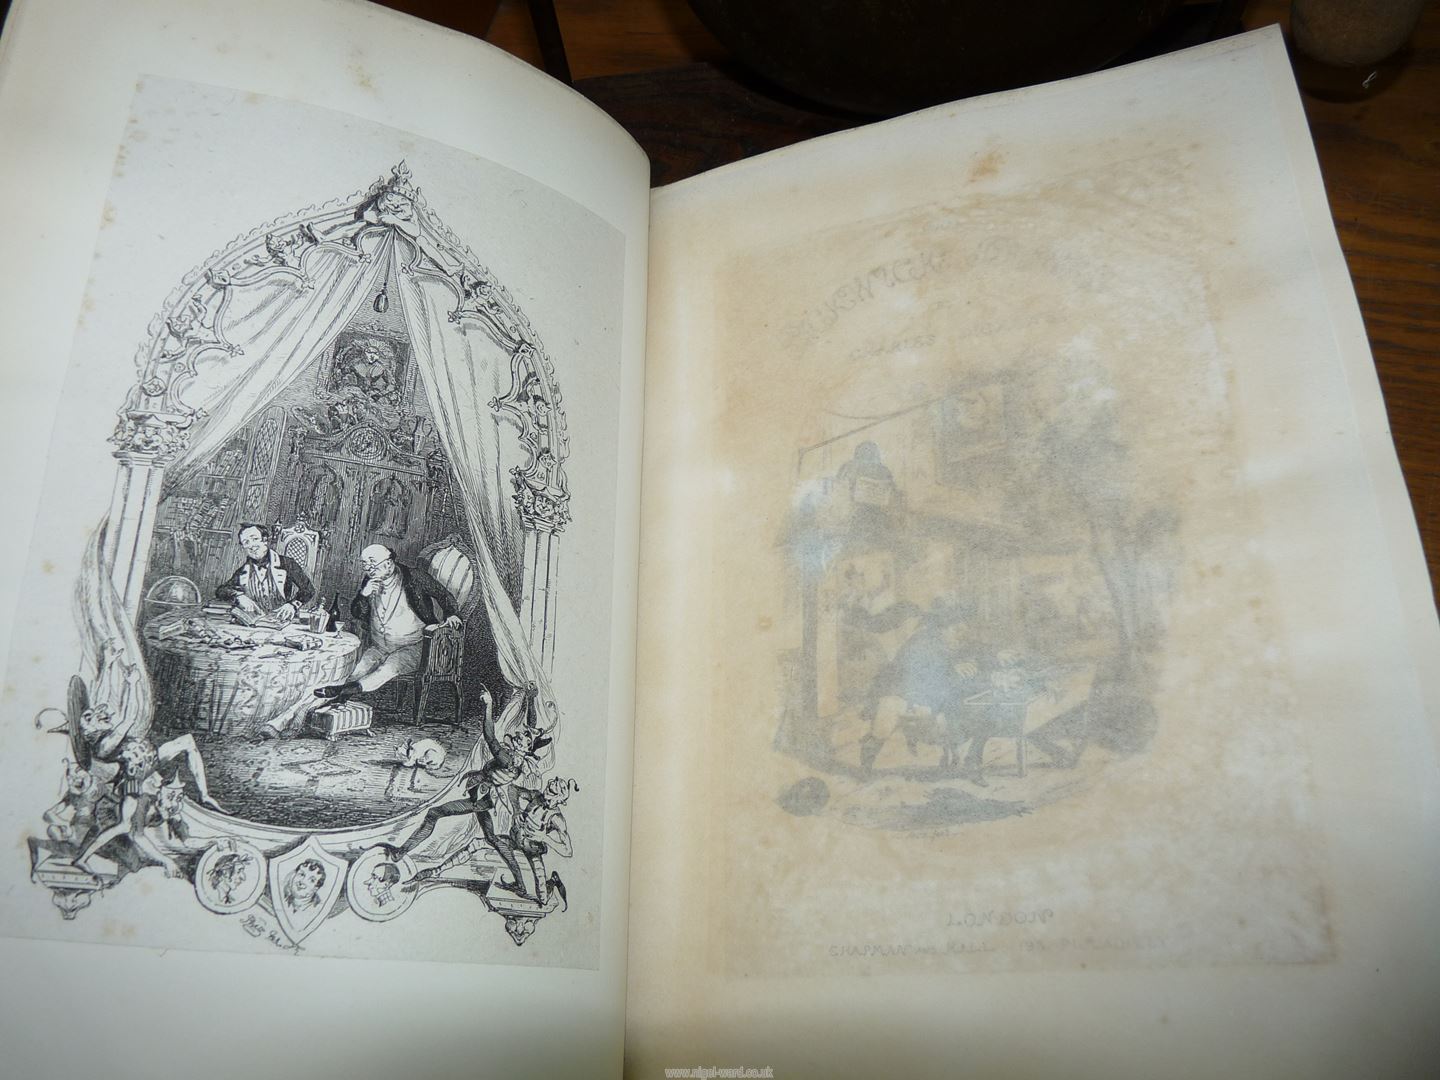 'The Works of Charles Dickens' a limited edition (47/1000) of 30 volumes printed by Chapman and - Image 5 of 6